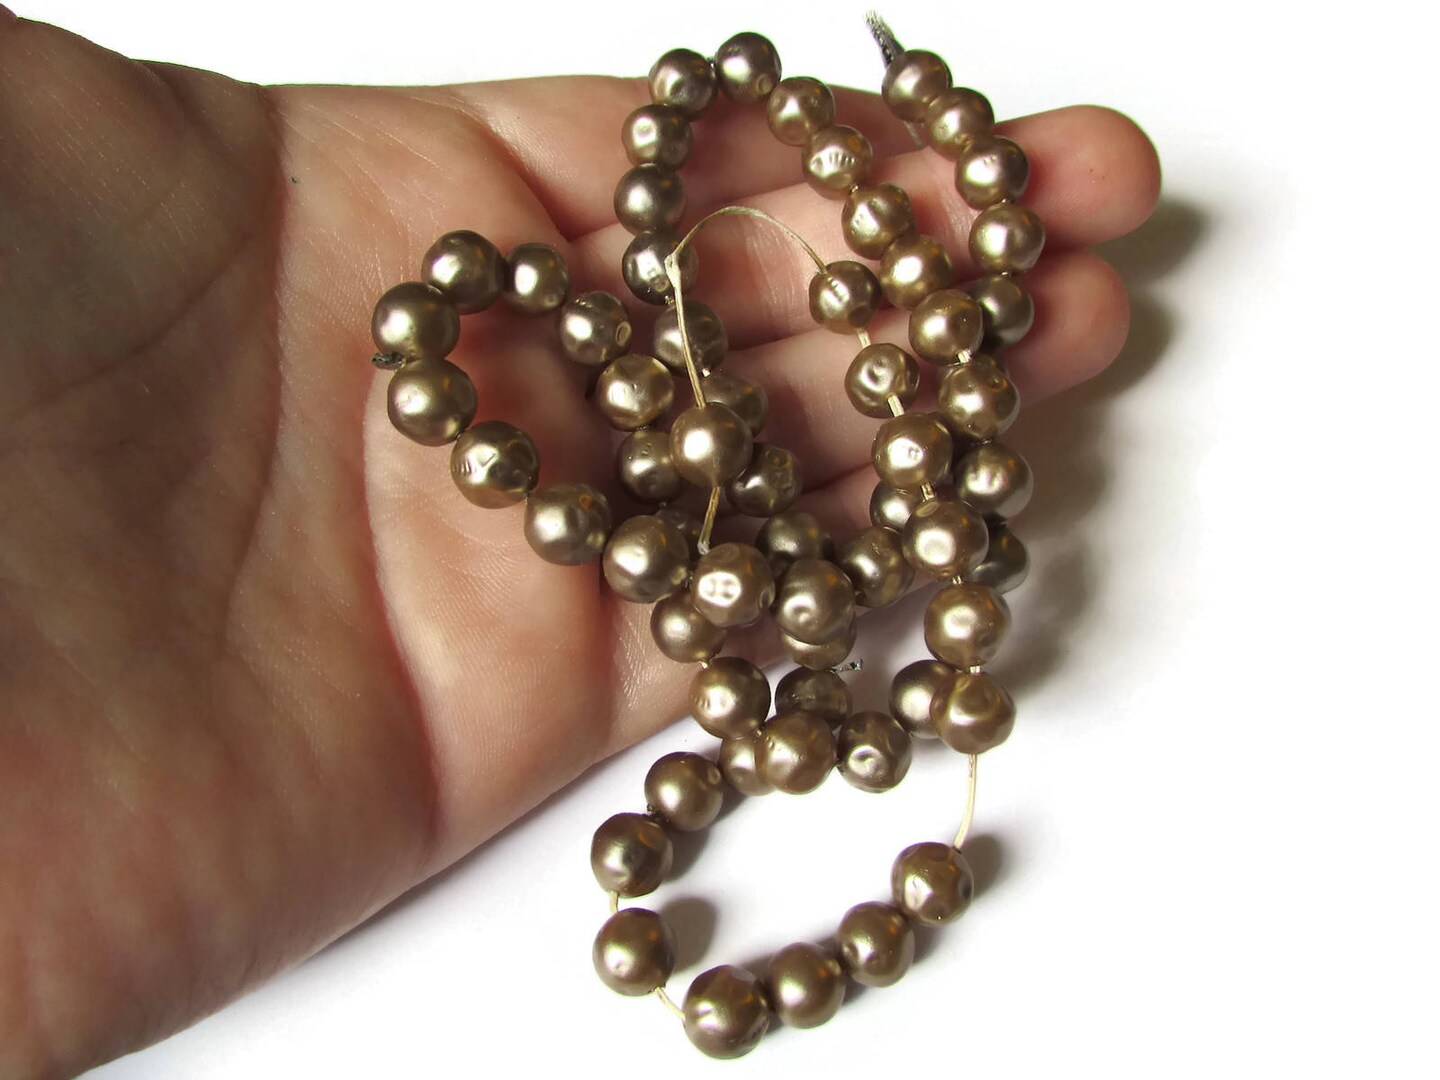 60 7.5mm Brown Round Faux Pearl Vintage Plastic Beads